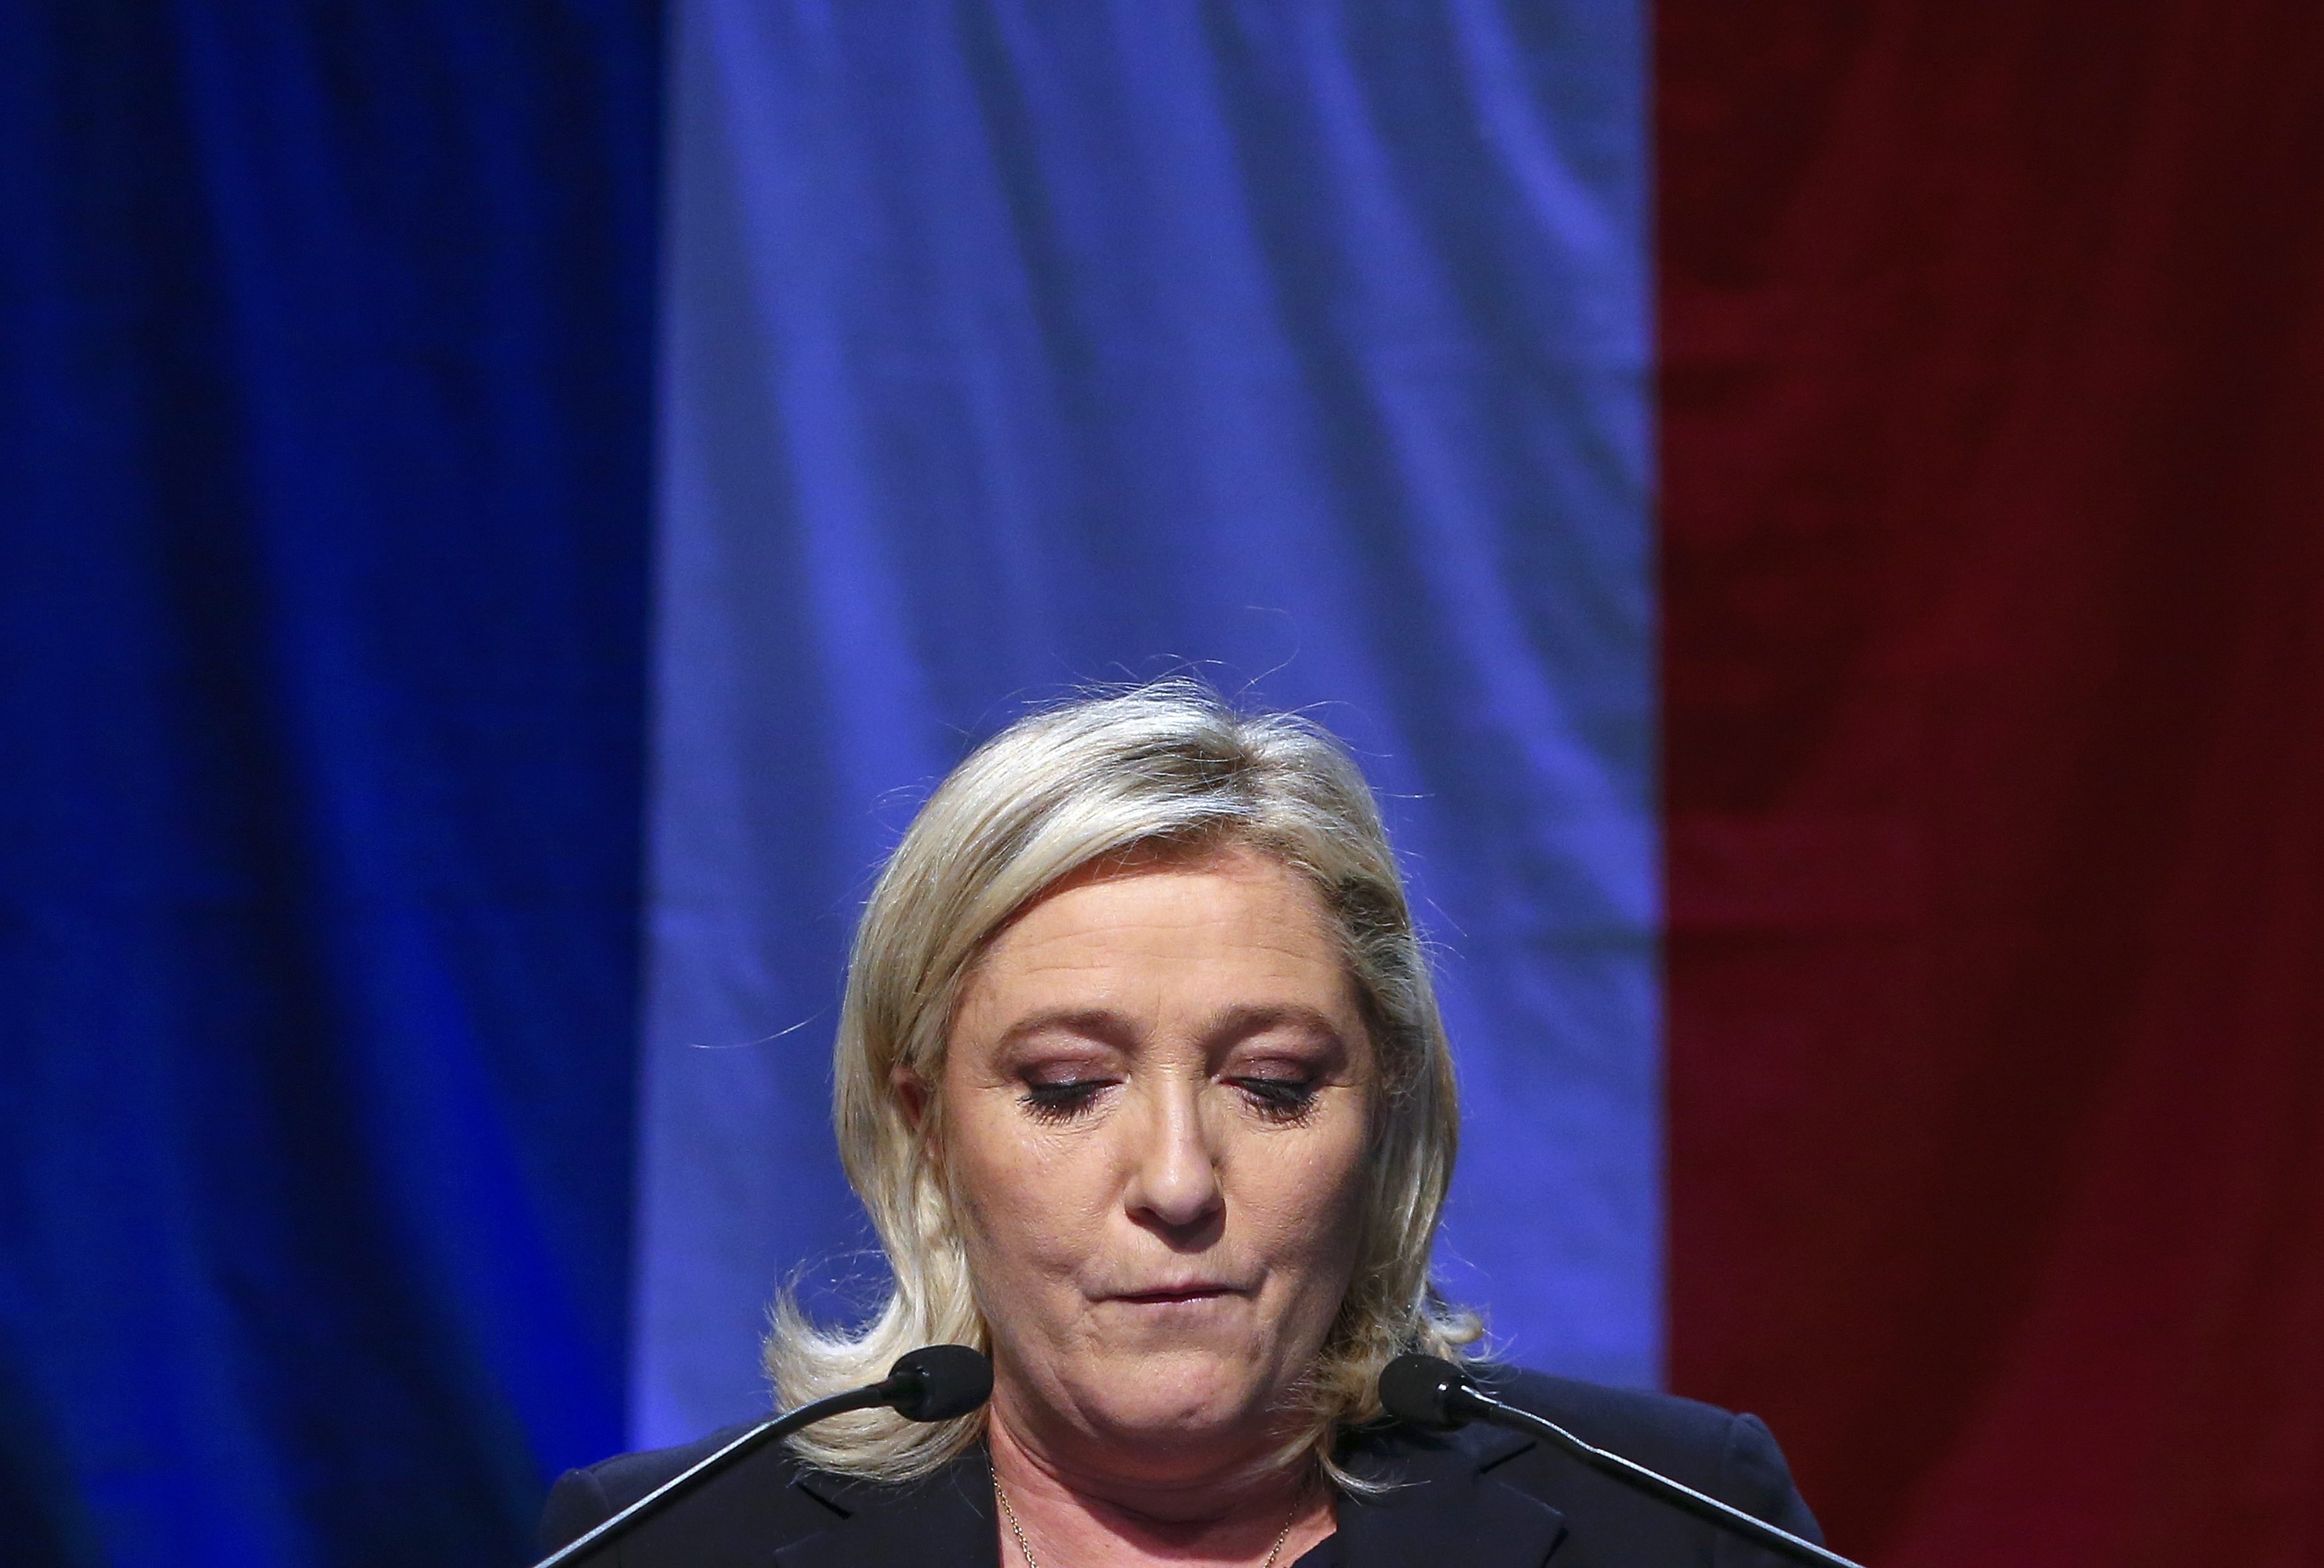 Marine Le Pen, French National Front political party leader and candidate for the National Front in the Nord-Pas-de-Calais-Picardie region, delivers a speech after results in the second-round regional elections in Henin-Beaumont.